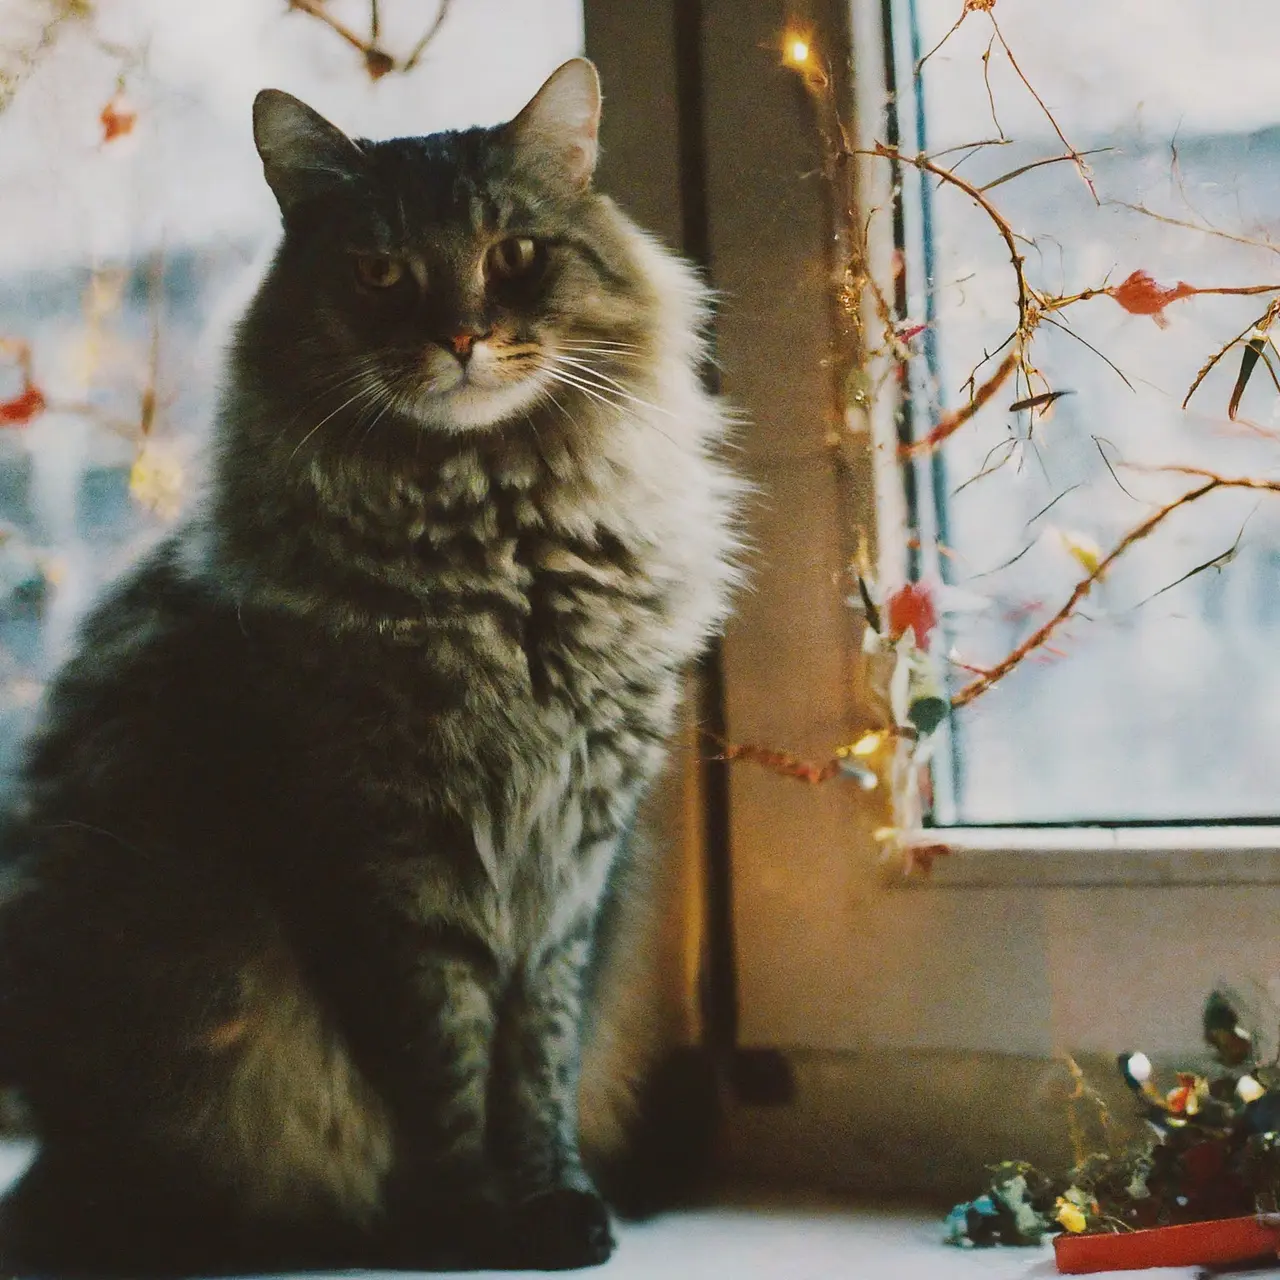 A fluffy cat sitting by a decorated holiday window. 35mm stock photo